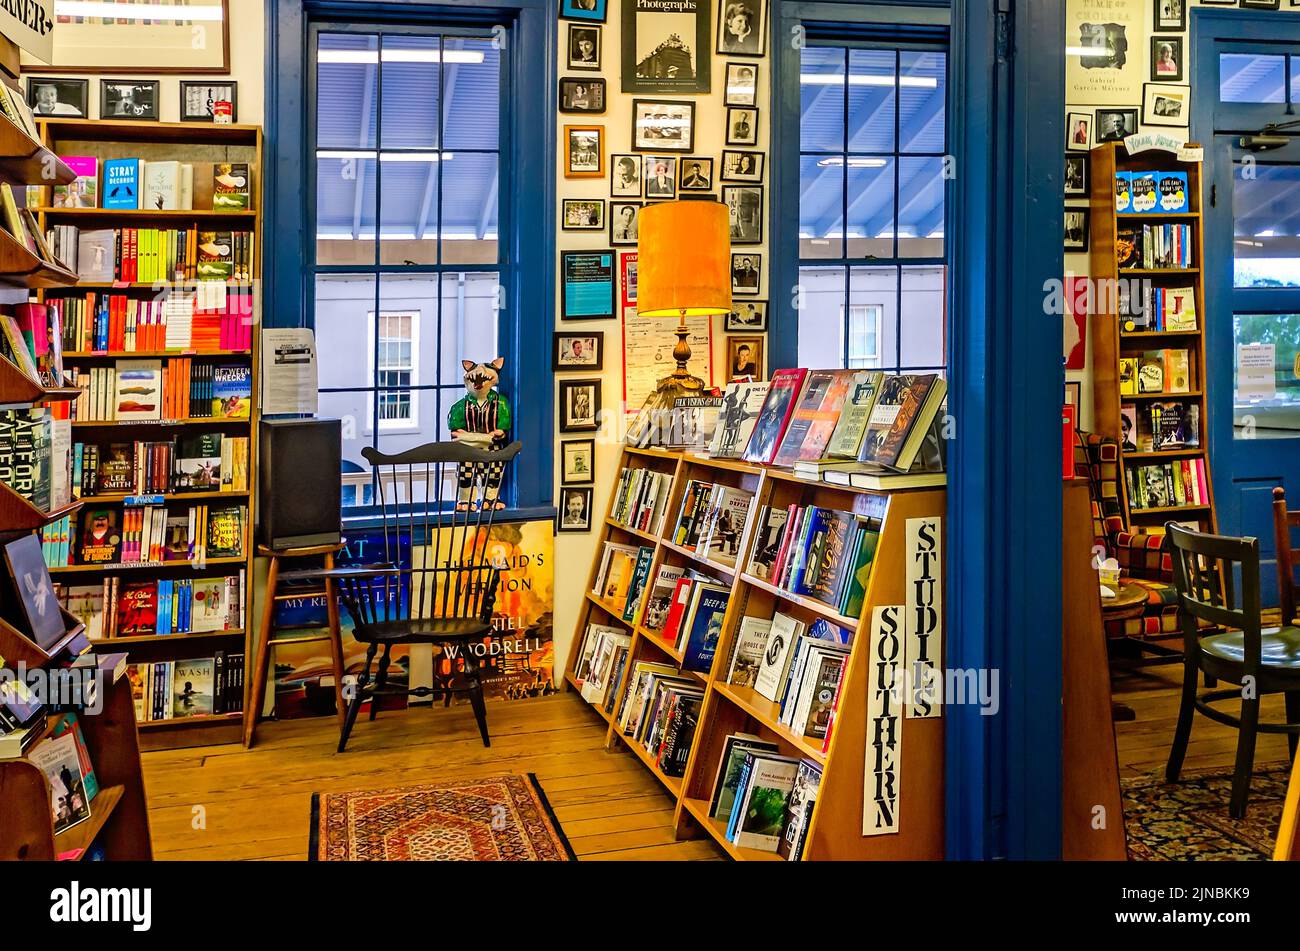 Square Books is pictured upstairs in the Southern Studies section, May 31, 2015, in Oxford, Mississippi. Stock Photo